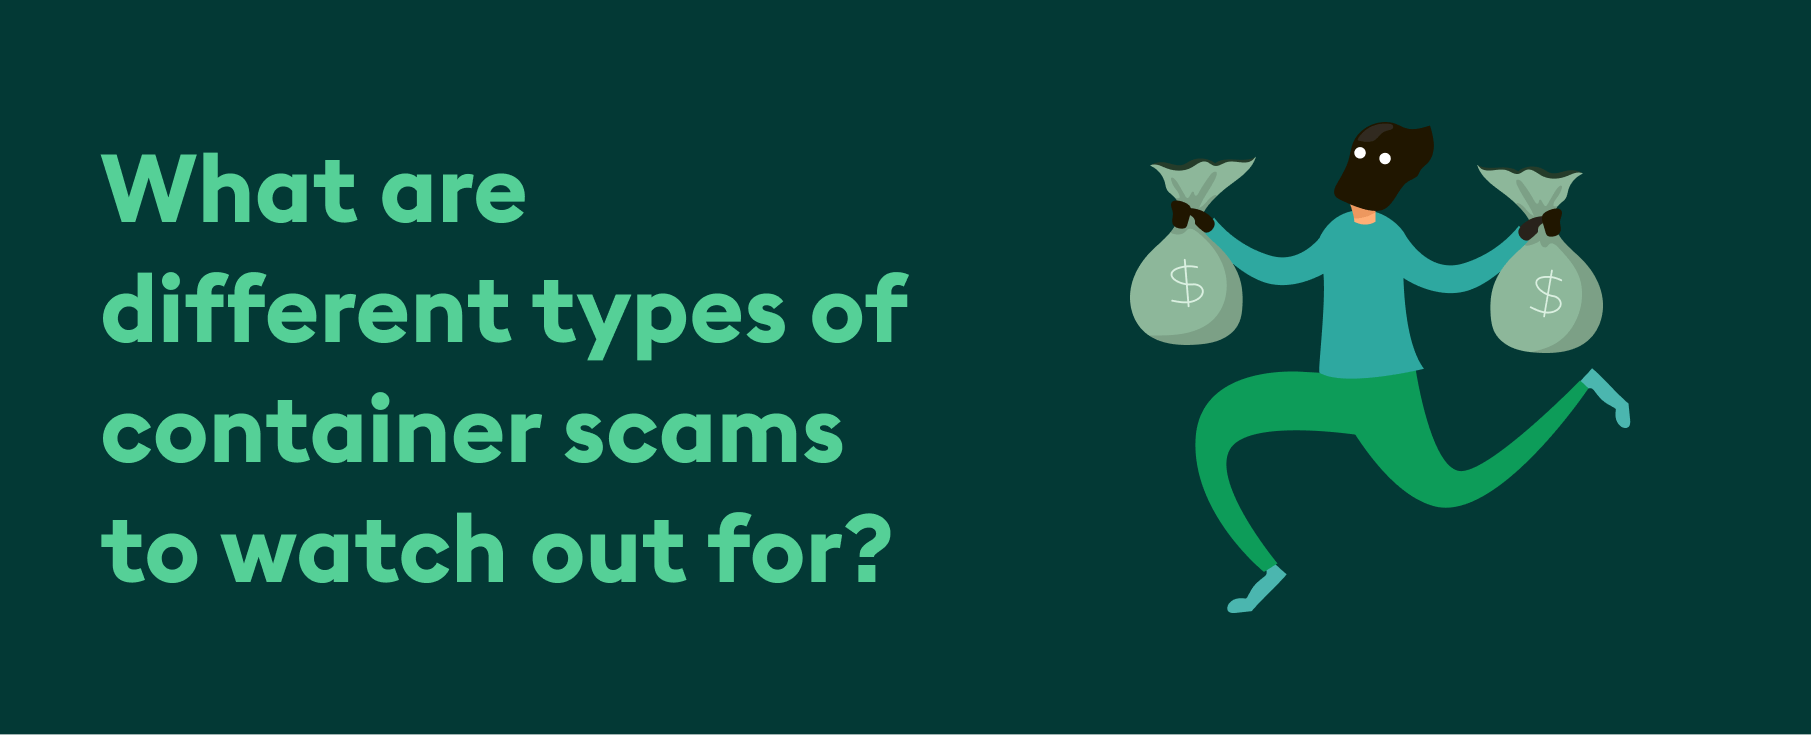 Different types of container scams